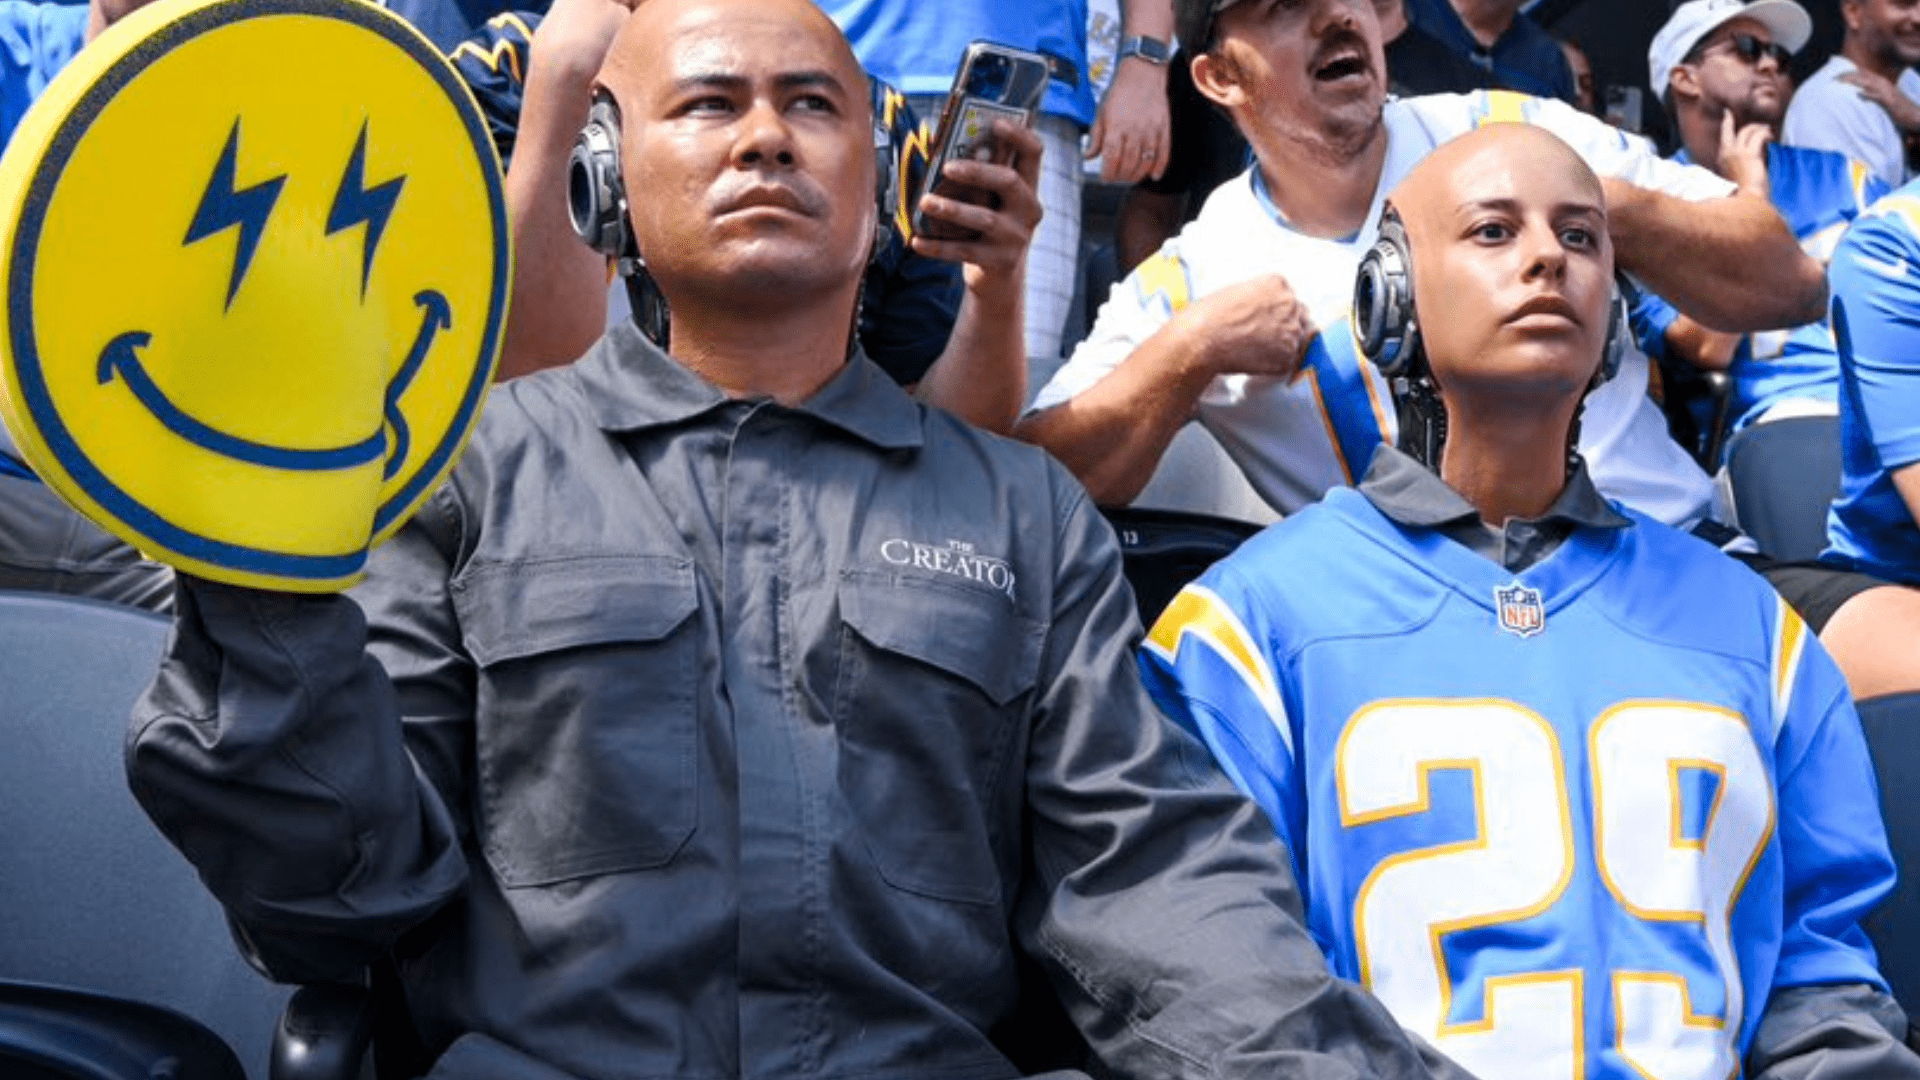 Chargers Filled SoFi Stadium With A.I. Fans Instead Of Real People